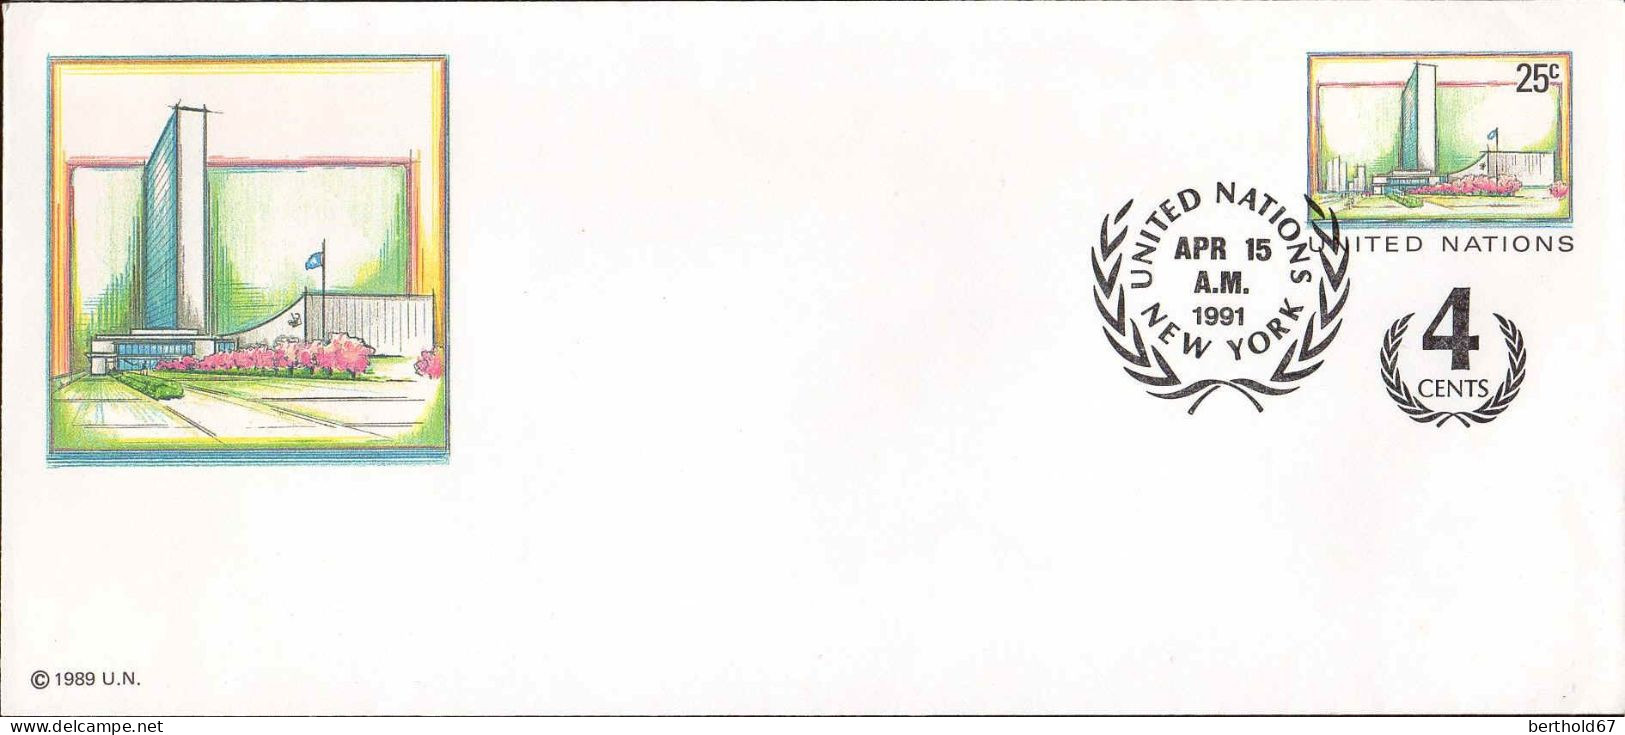 ONU (New-York) Entier-P Fdc (113) United Nations Headquarters Env GdFormat 25c 15apr1991 +4cents - FDC